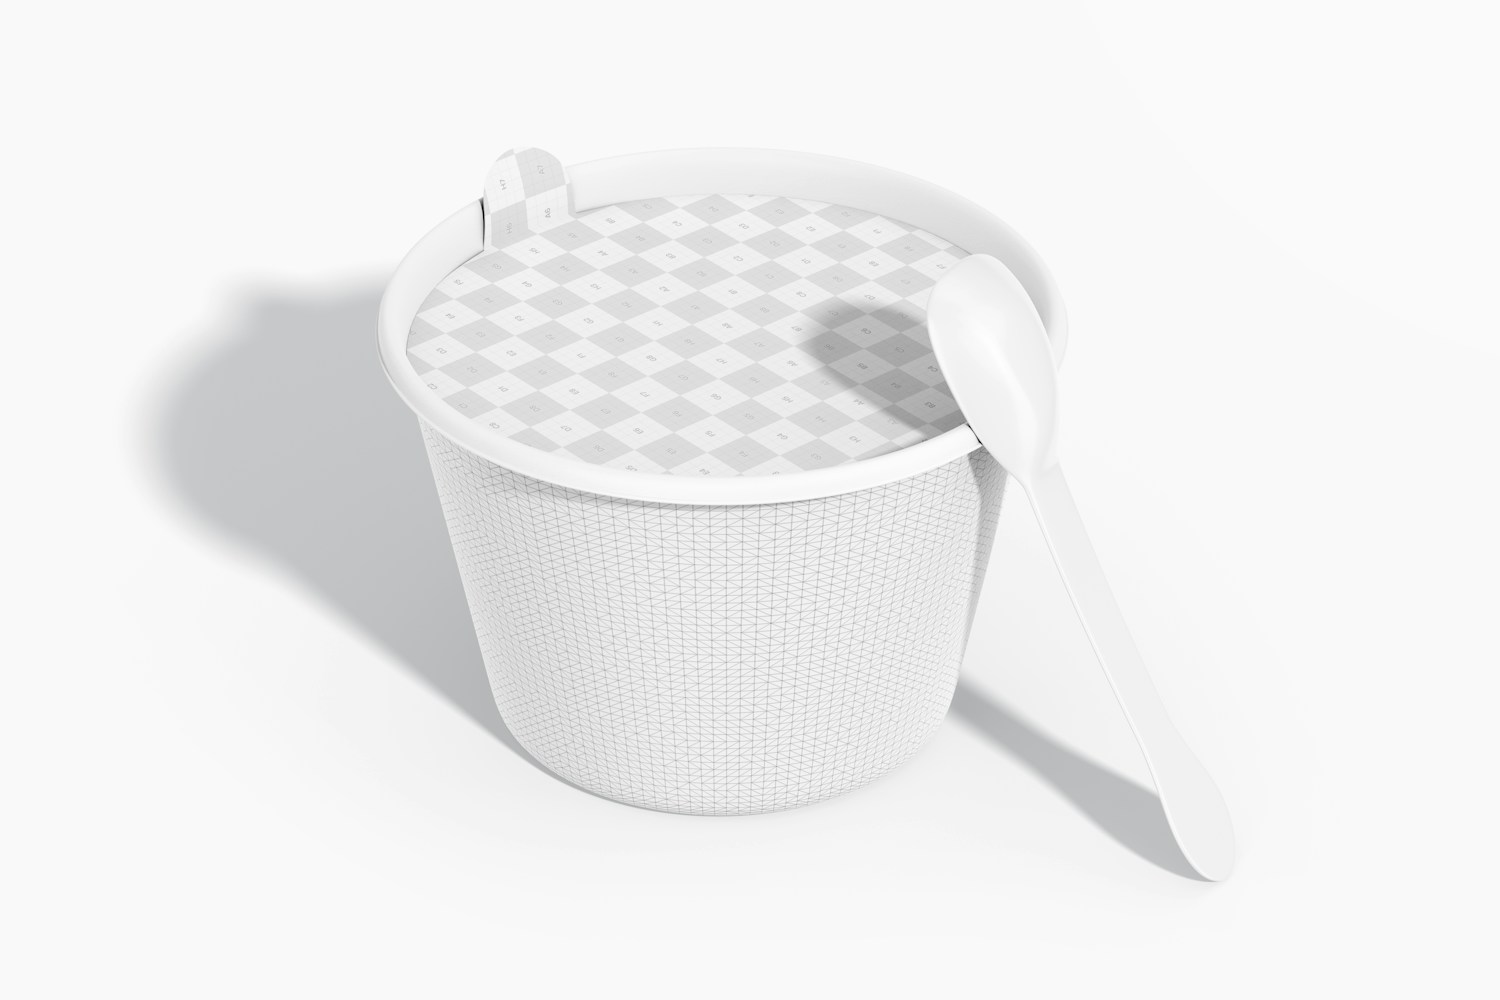 Ice Cream Paper Cup Mockup, Perspective